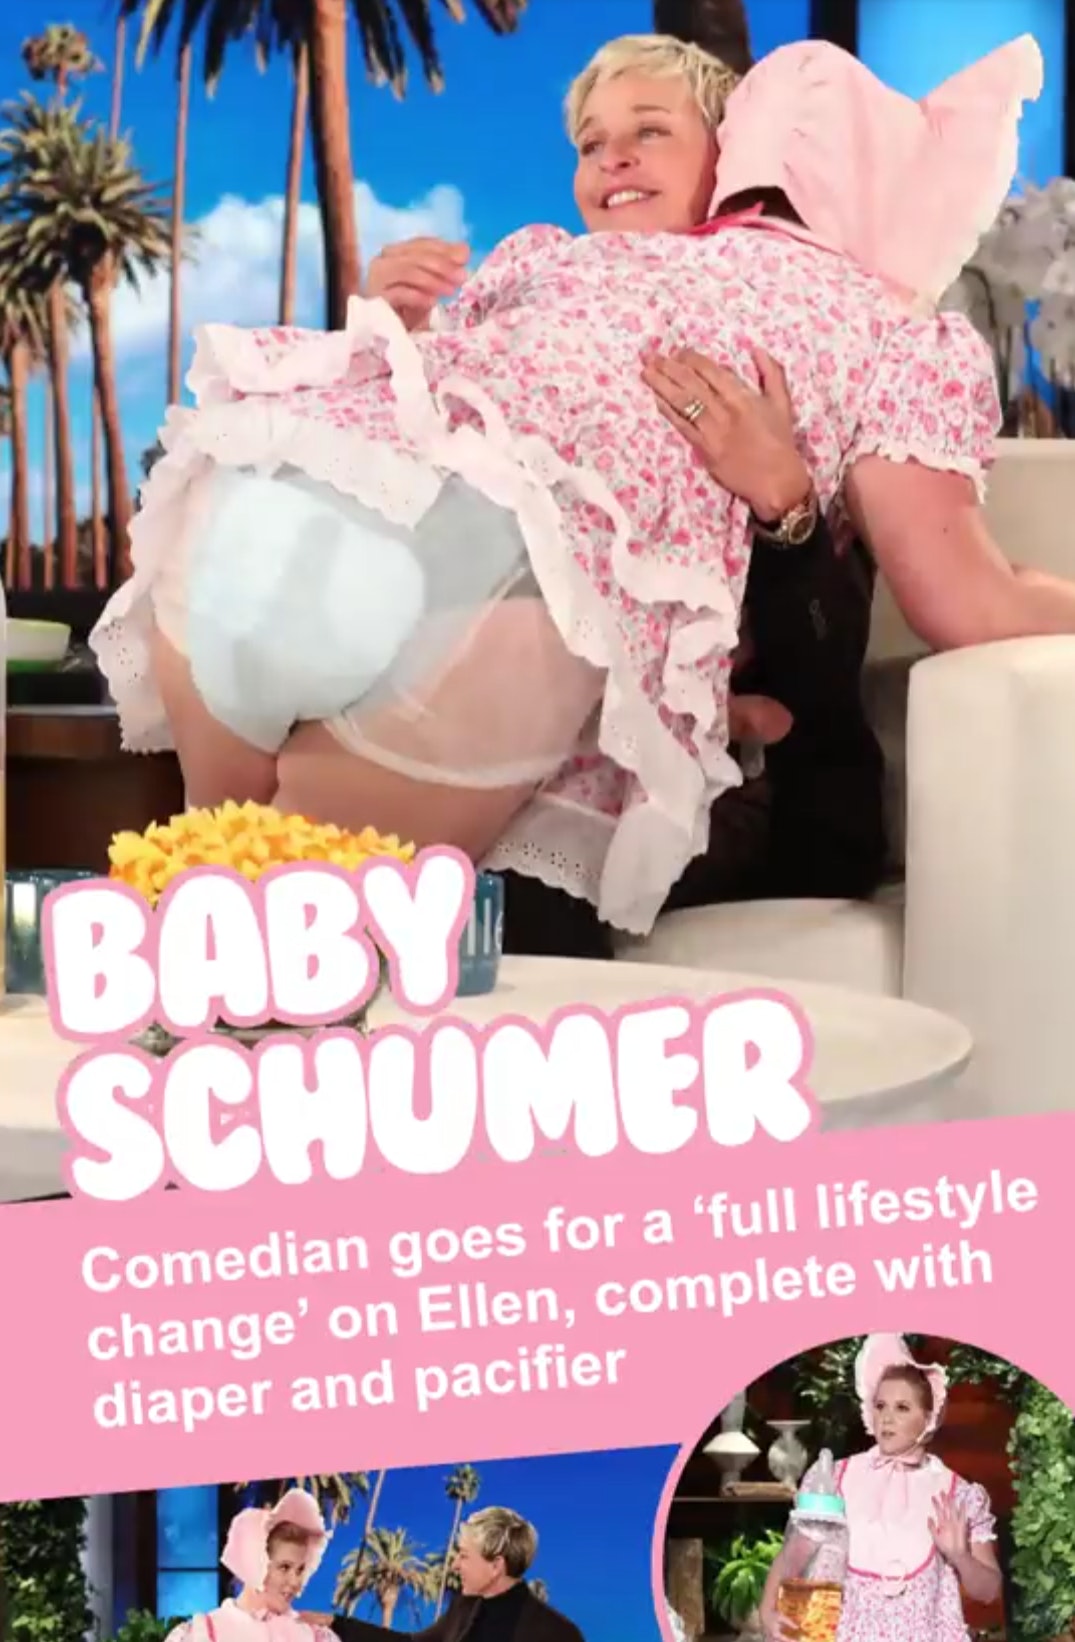 summer - Schumer Comedian goes for a 'full lifestyle change' on Ellen, complete with diaper and pacifier